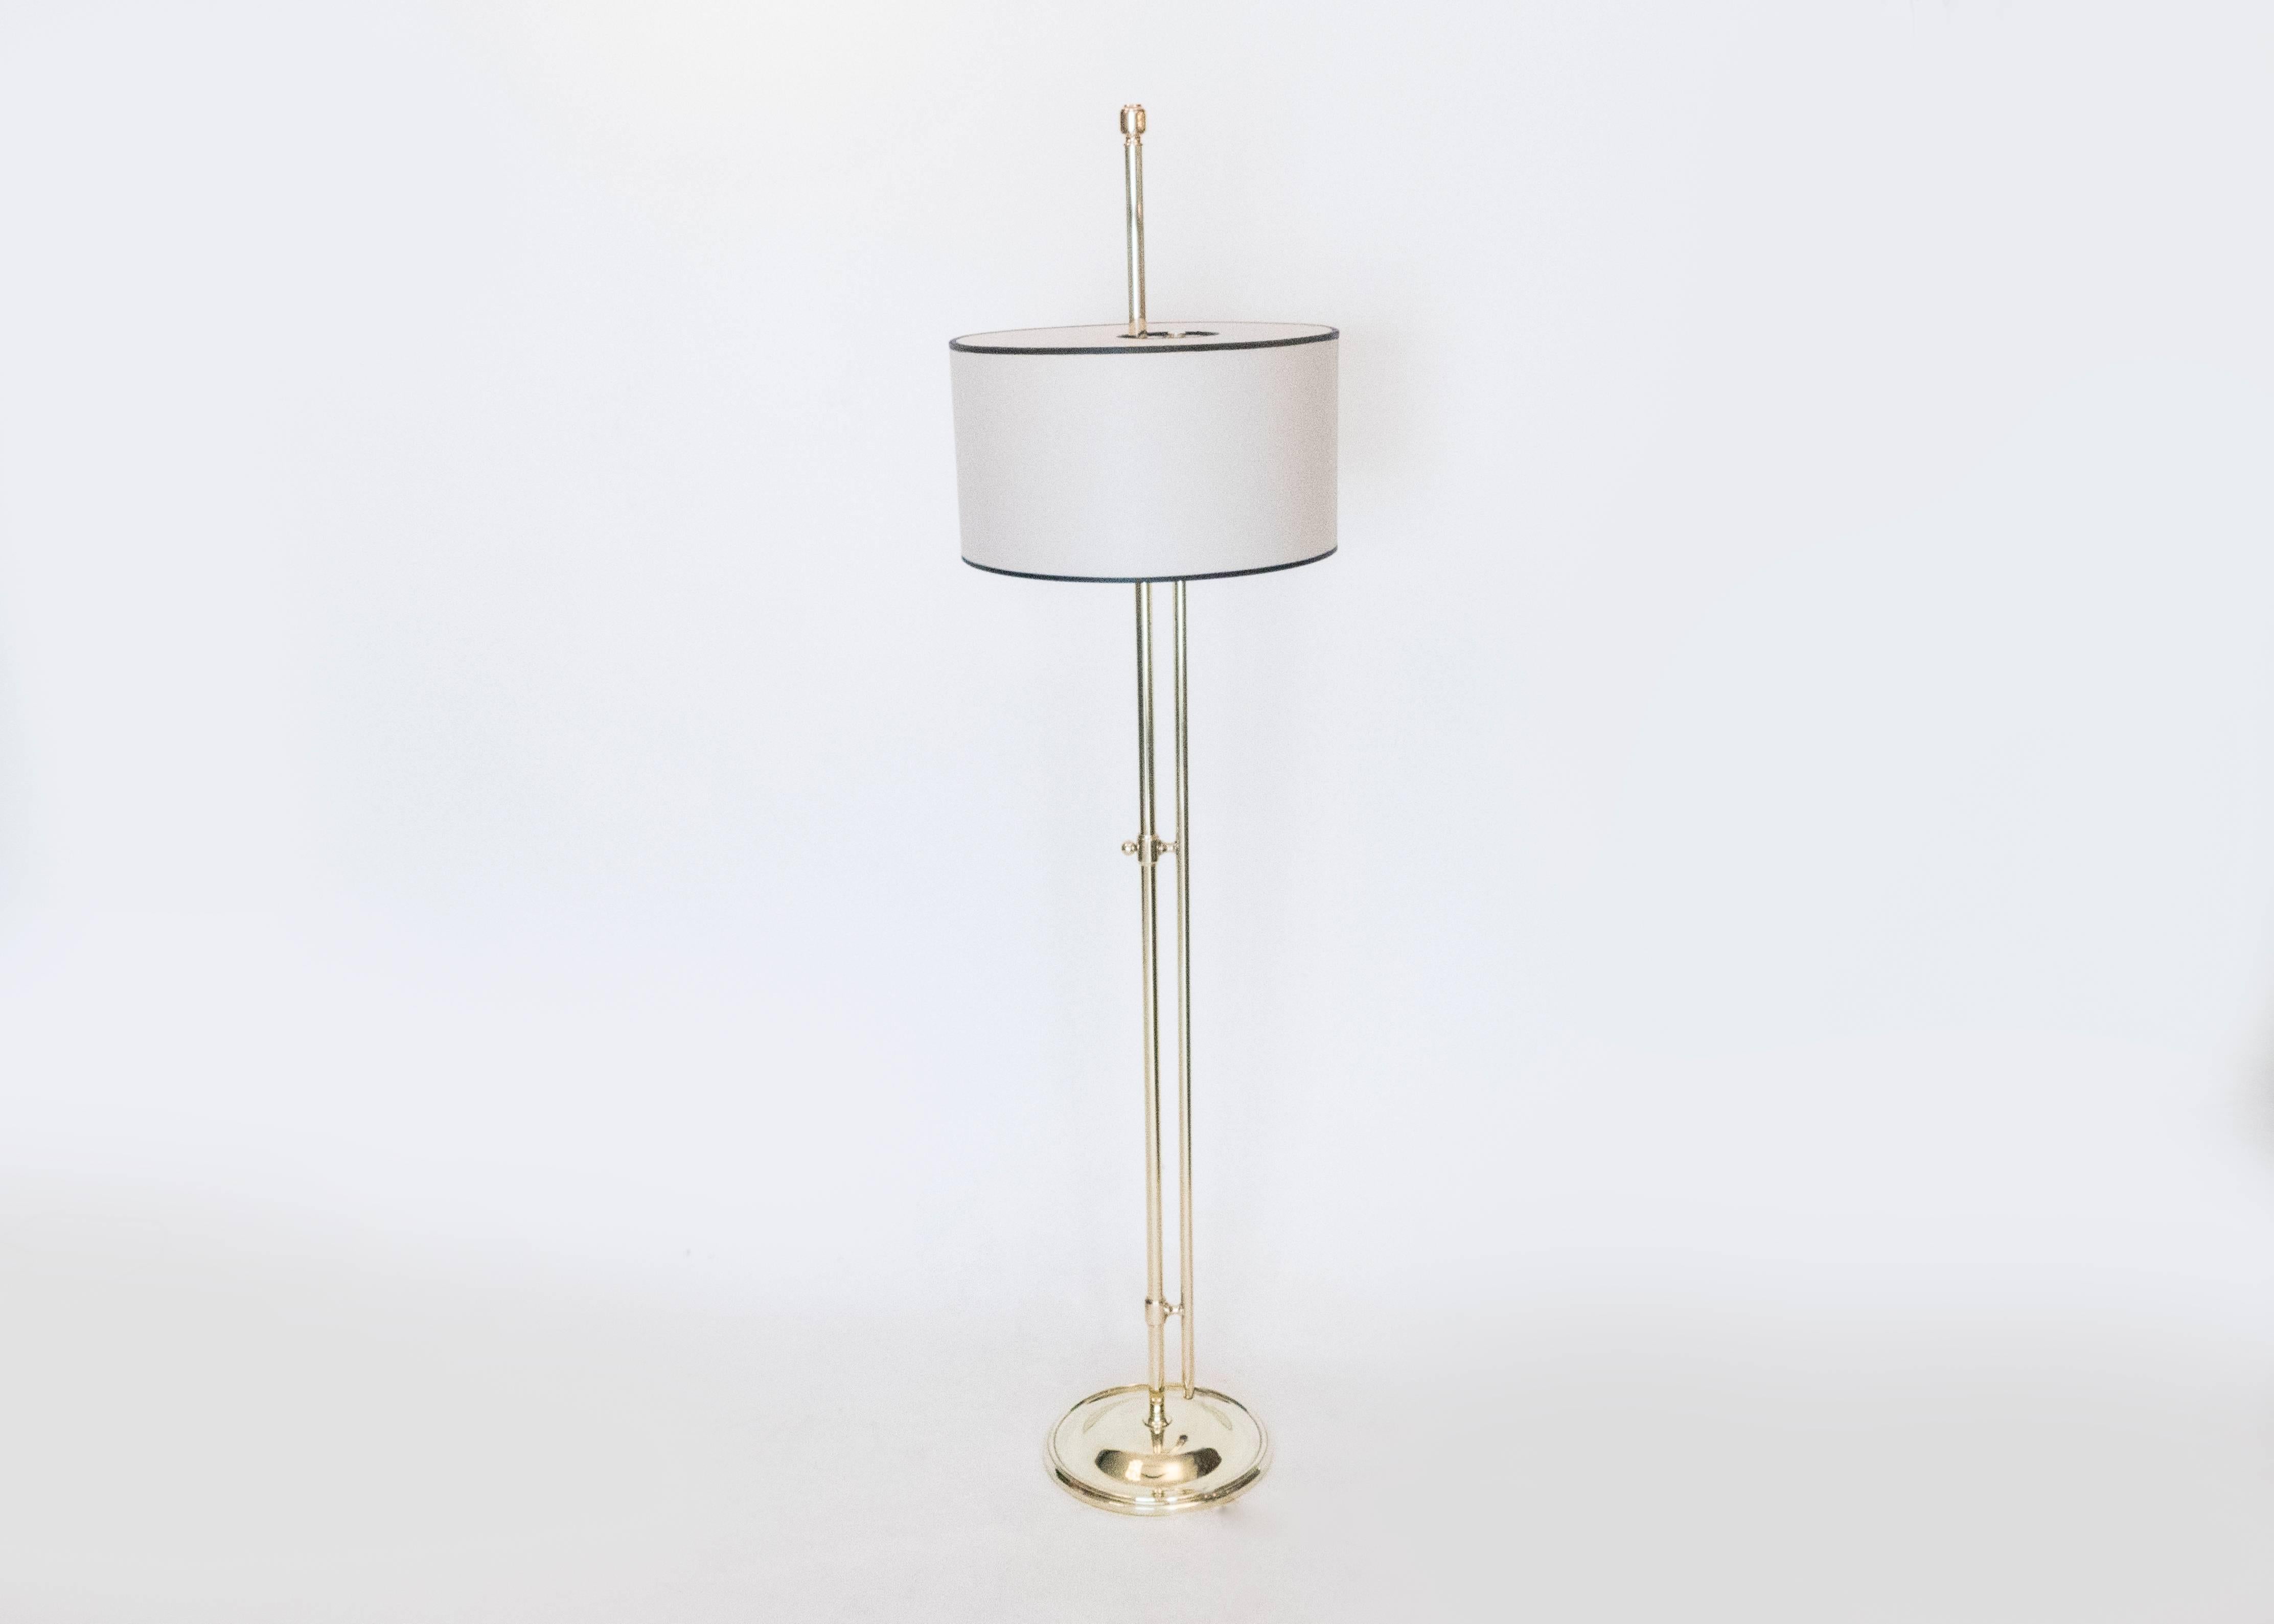 A beautiful pair of floor lamps in brass. Their unique design allows for them to adjust their height while the frame passes through the parchment shade. Maximum height is 65